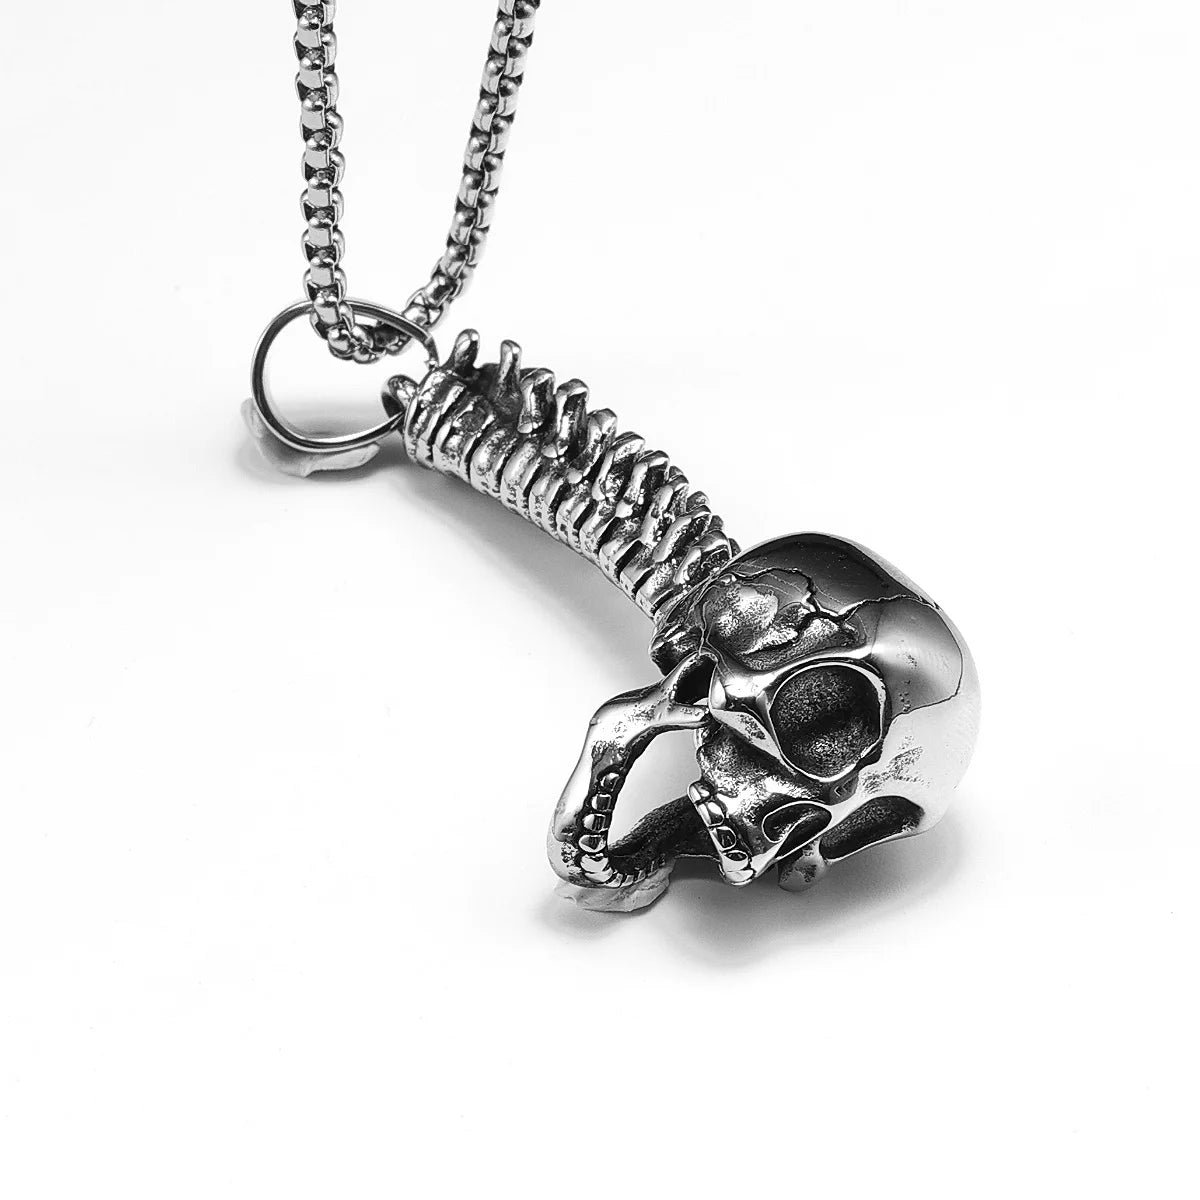 Skull Spine Stainless Steel Necklace Pendant. Badass gifts for badass. Badass birthday gifts. Badass Christmas gifts for badasses. Badass skull accessories. Valentine gifts for him and her. Anniversary gift for him and her. Anniversary gift for my badass husband and wife. Badass Birthday gift for my badass boyfriend and girlfriend. Badass Birthday gift for my badass husband and wife.